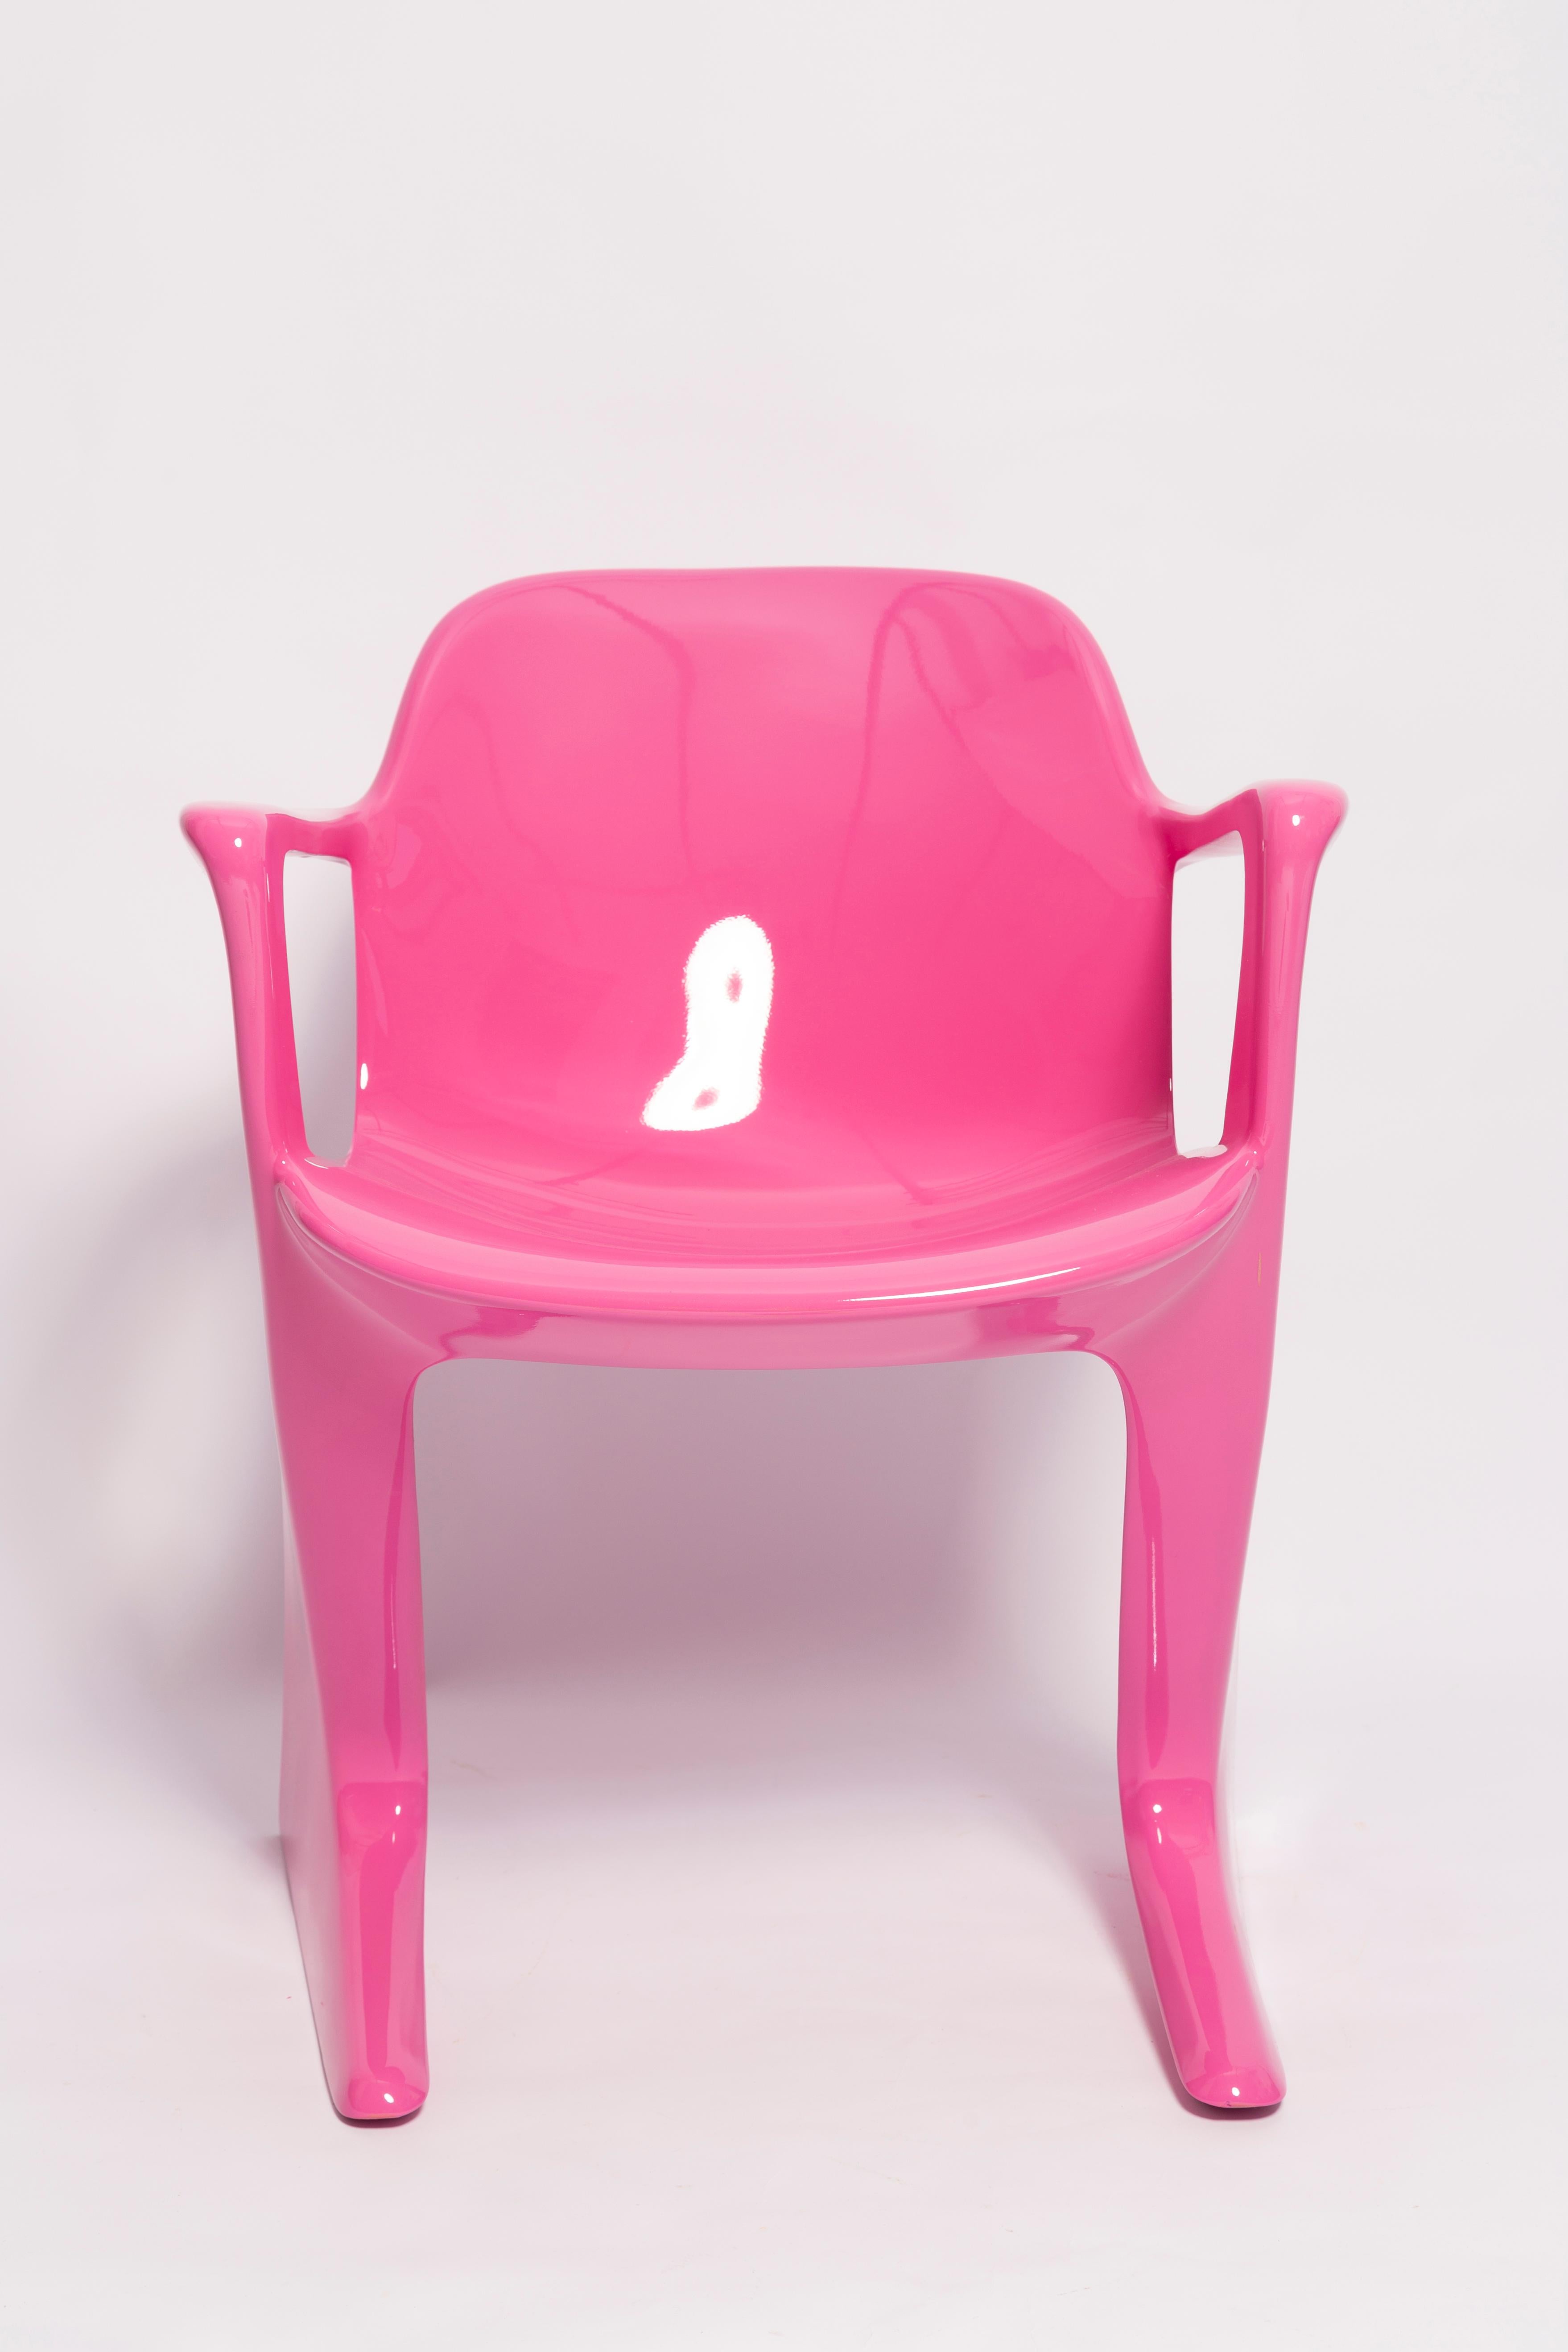 Set of Four Mid Century Pink Kangaroo Chairs, Ernst Moeckl, Germany, 1960s For Sale 1